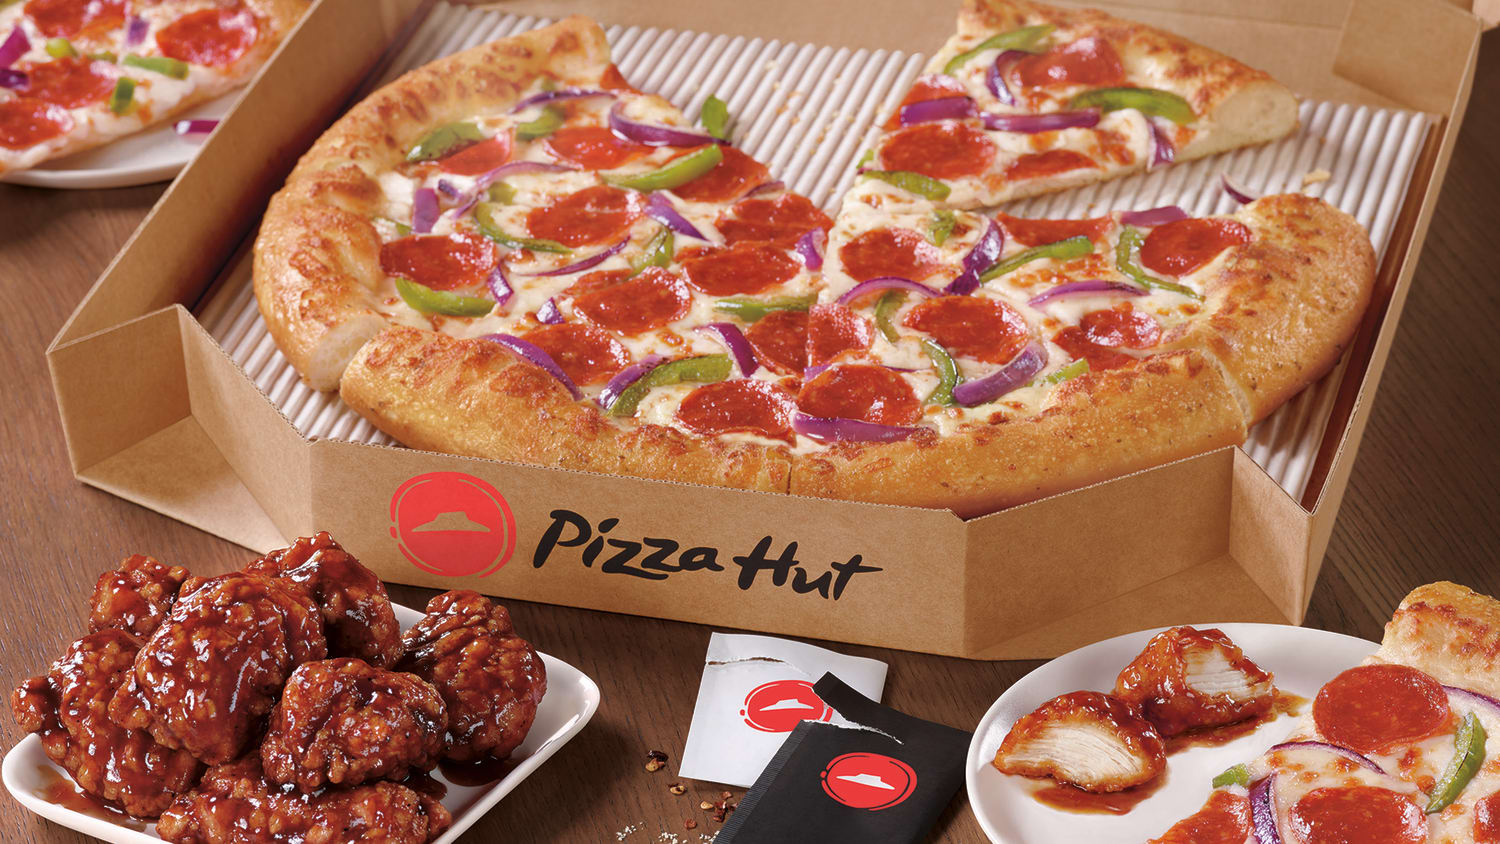 Pizza Hut is making a big change to its menu - but it's not about the pizza...